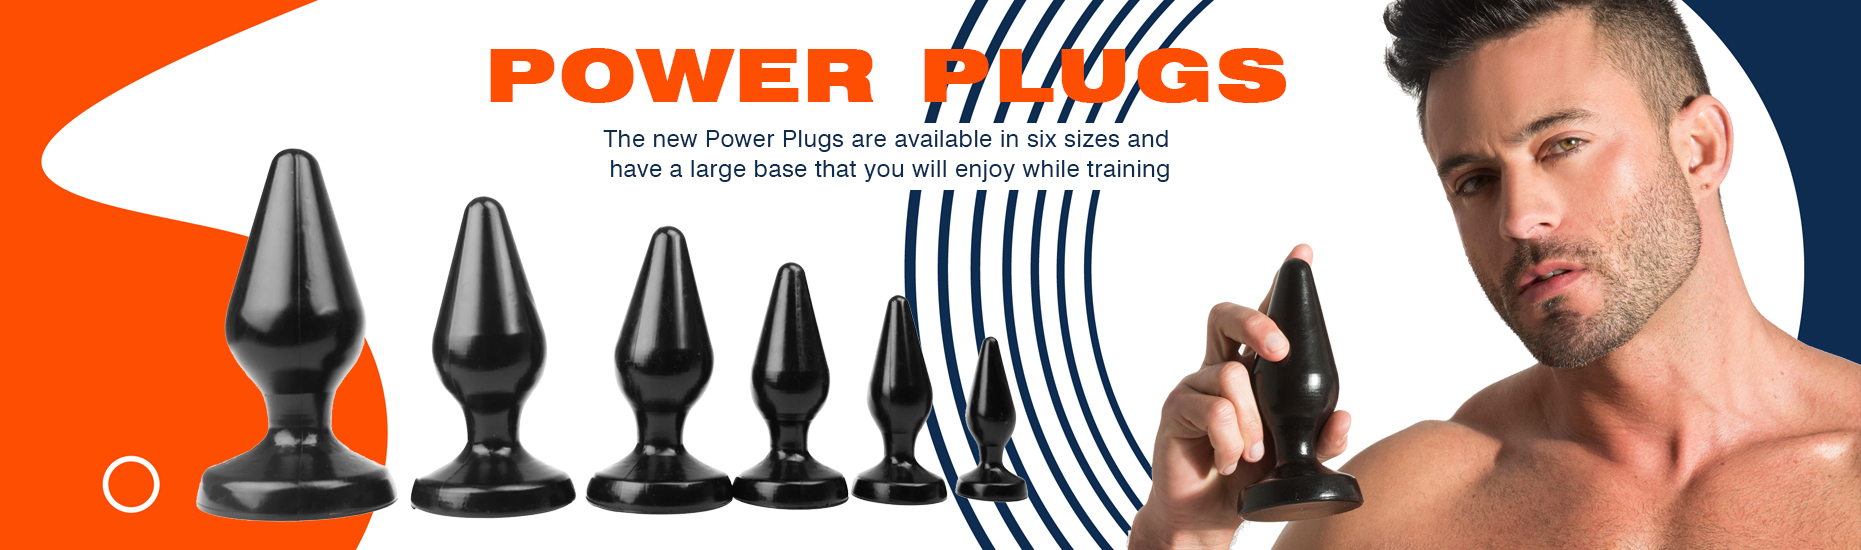 Power Plugs are available in six sizes!